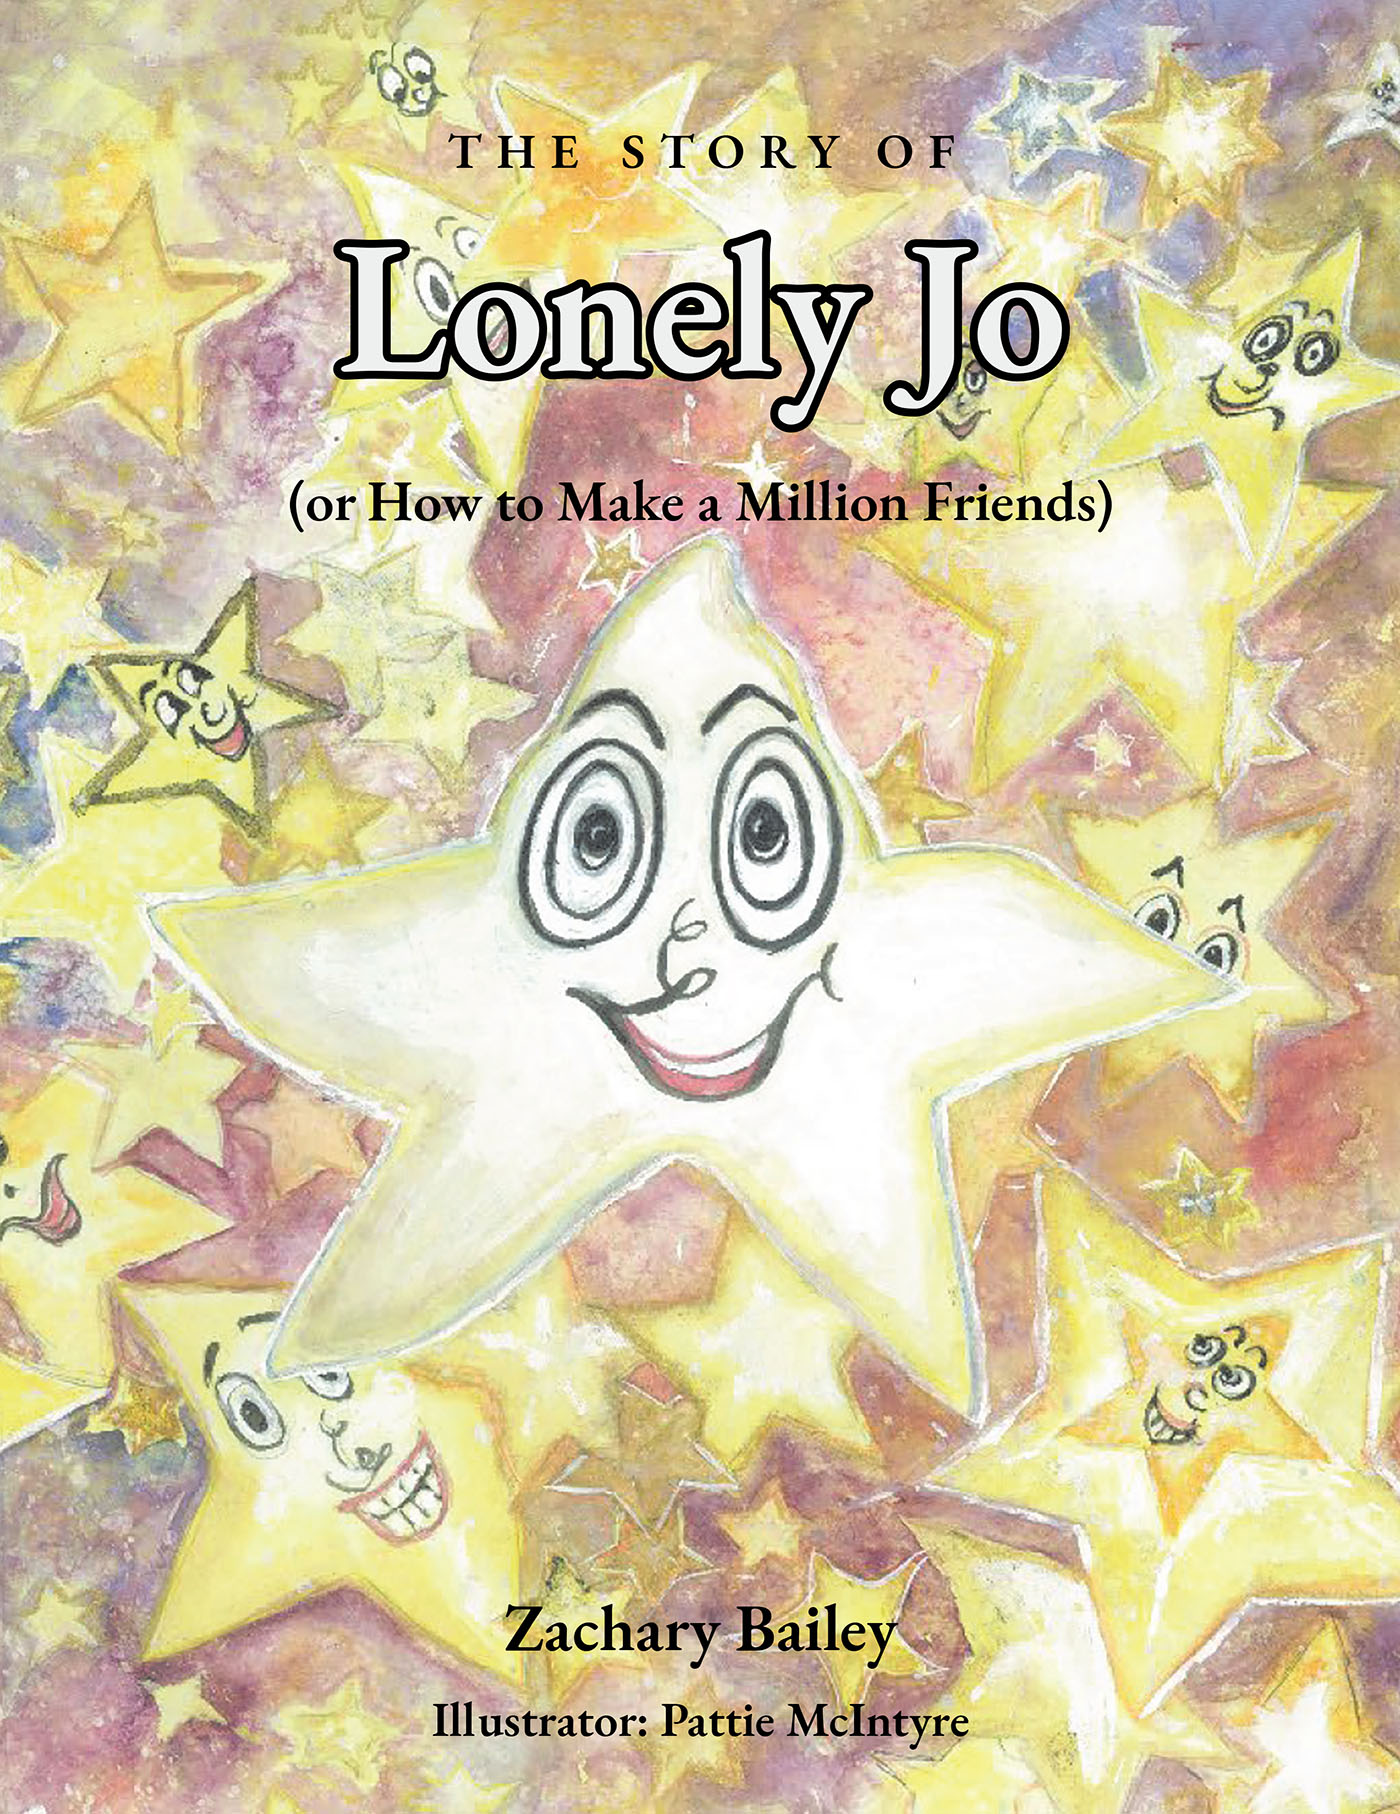 Zachary Bailey’s Newly Released “The Story of Lonely Jo (or How to Make a Million Friends)” is an Imaginative Story of Adventure in the Universe